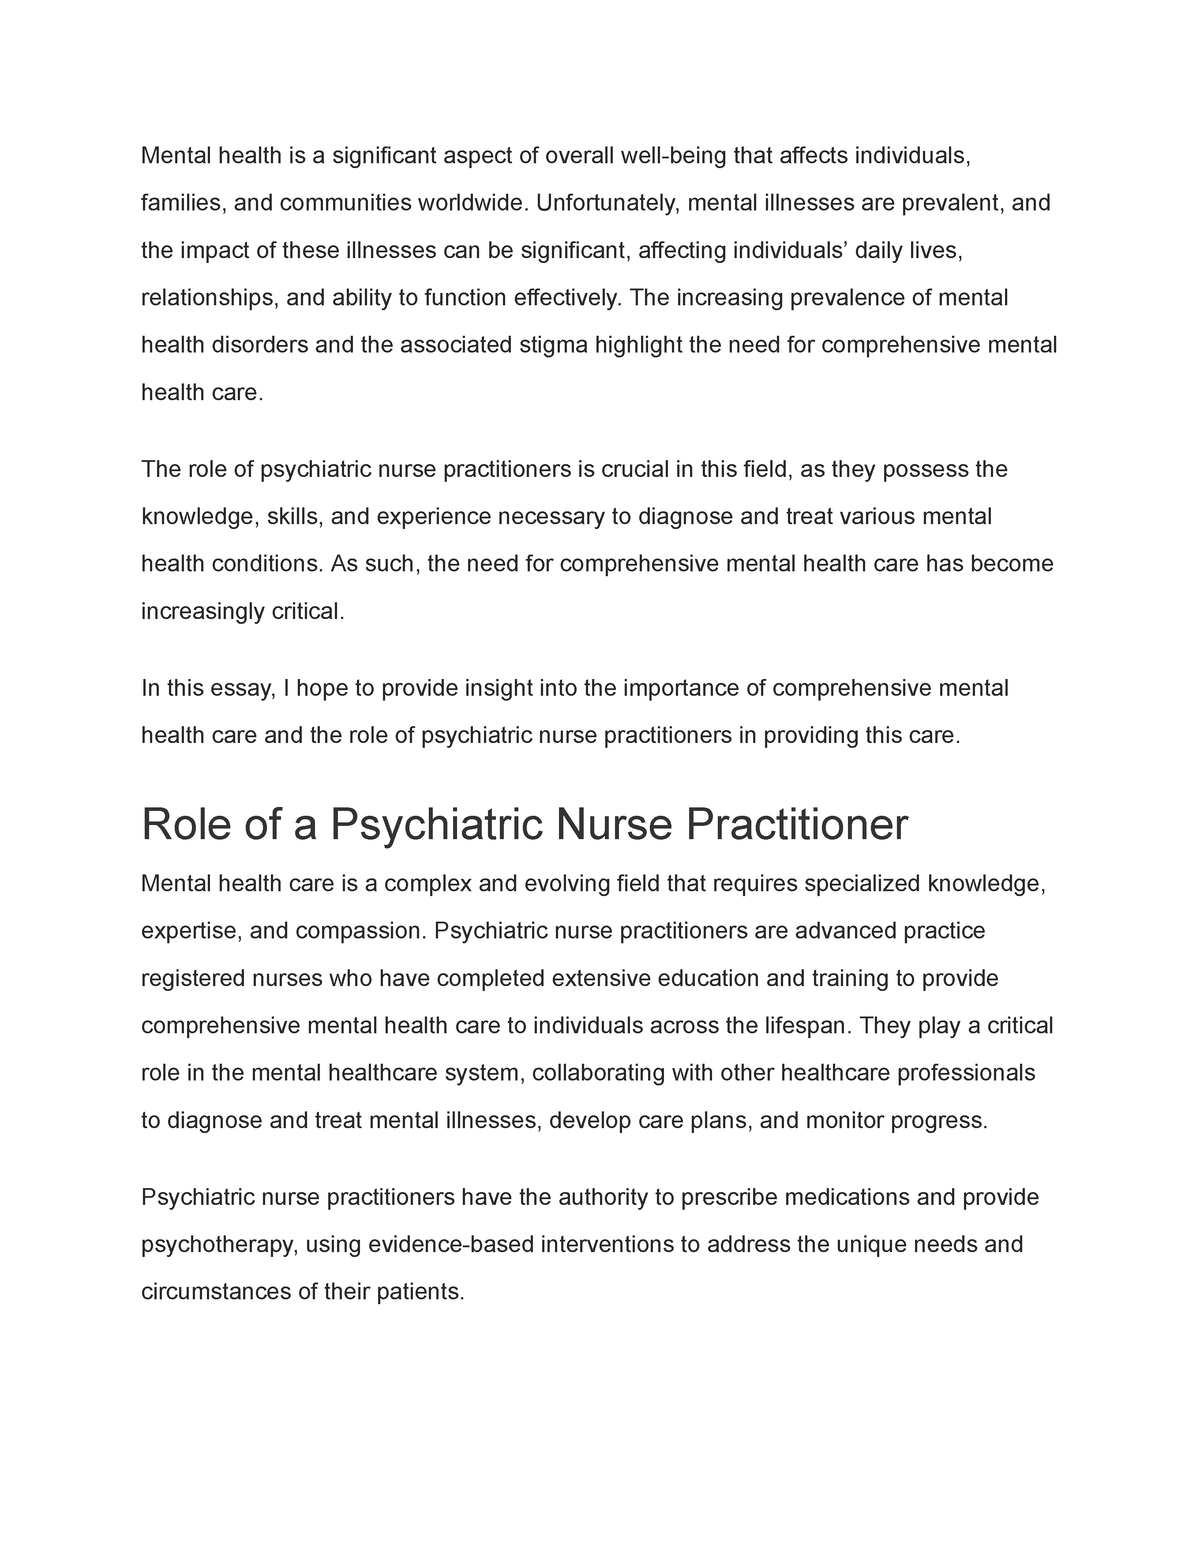 why i want to be a psychiatric nurse practitioner essay